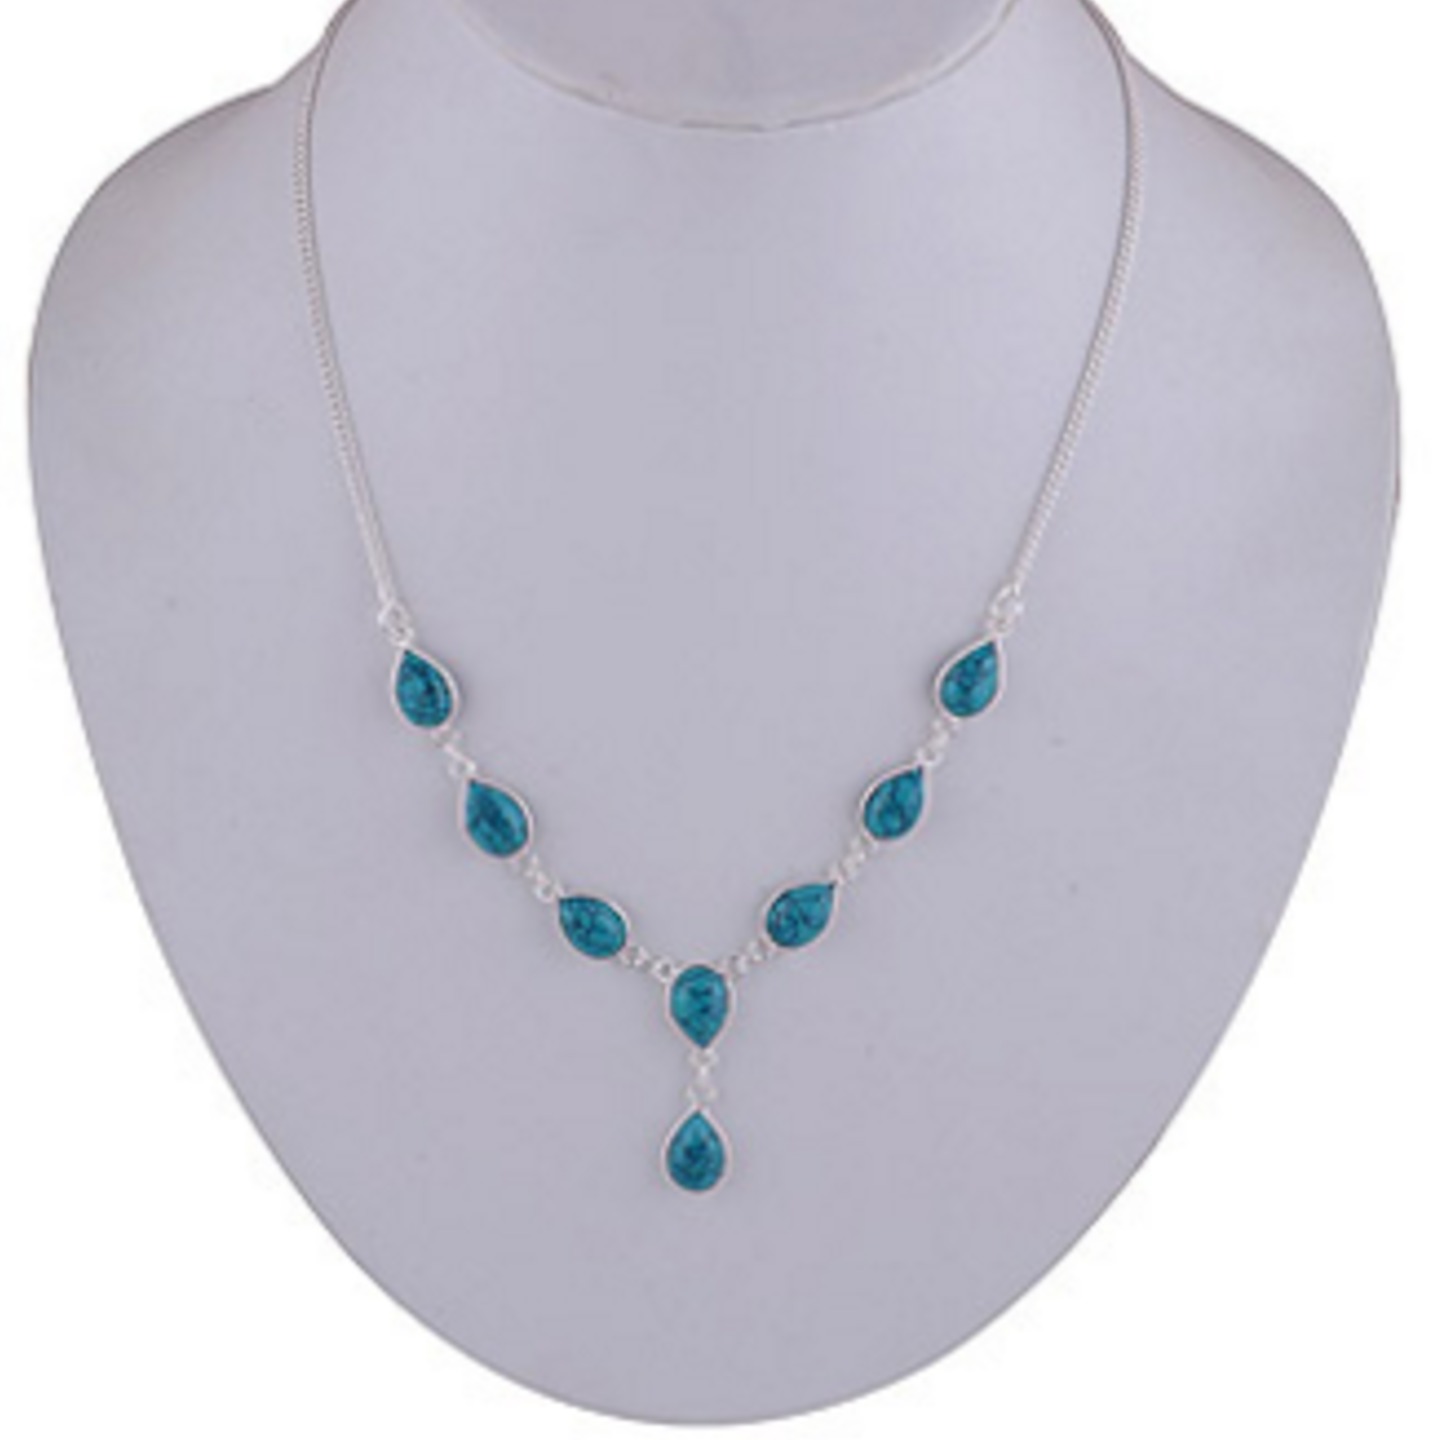 The Turquoise Silver Necklace